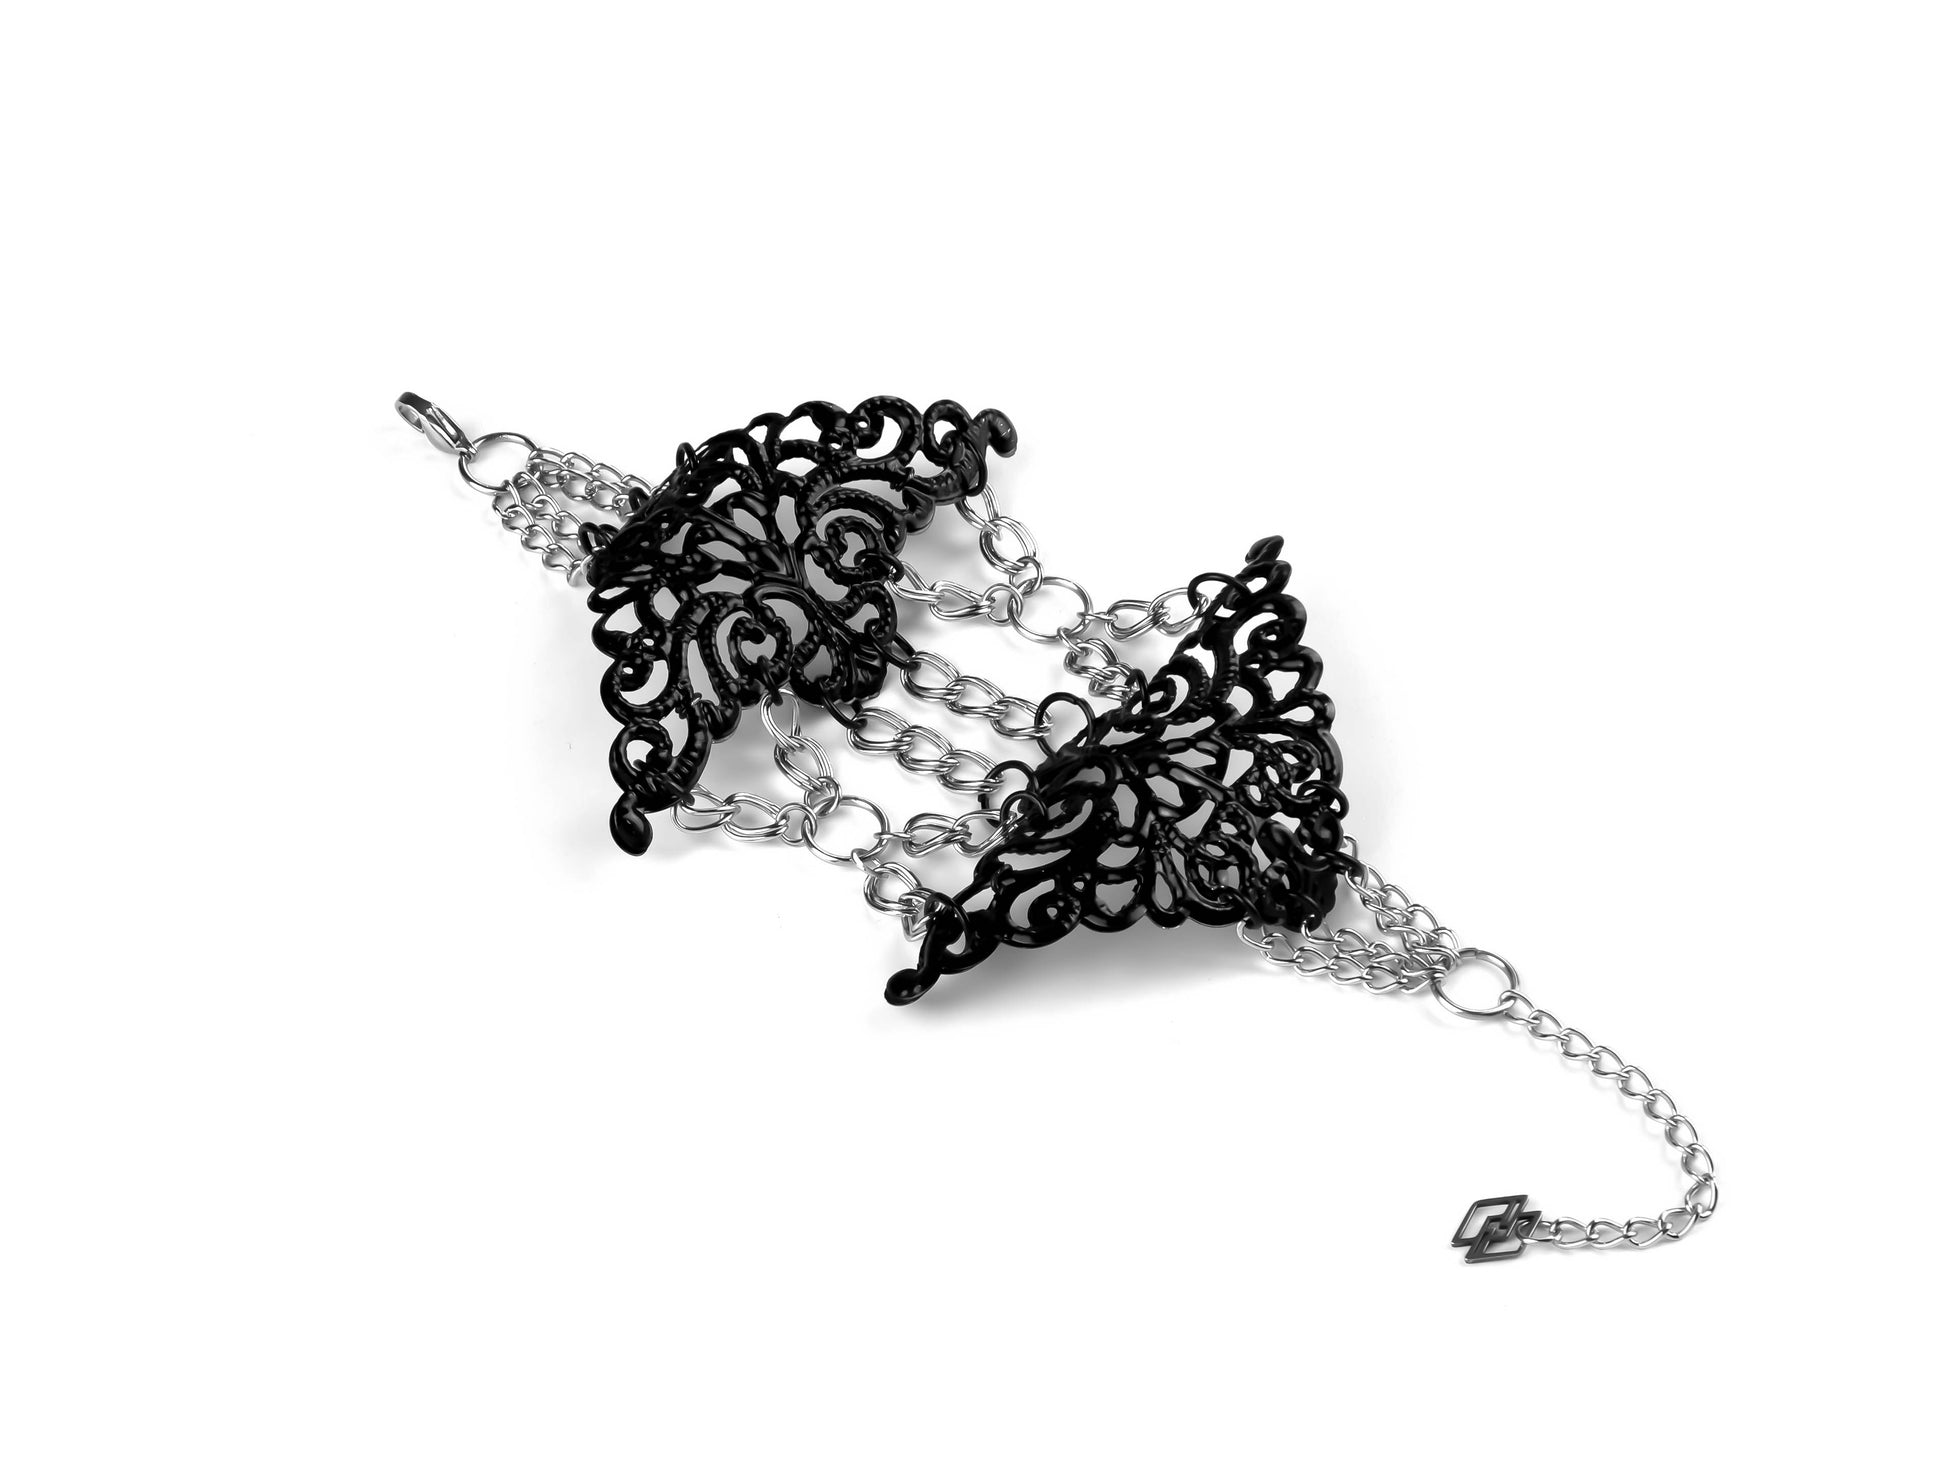 A striking Myril Jewels gothic bracelet crafted with intricate lace-like patterns, exemplifying neo-goth elegance, perfect for a darkly sophisticated accessory choice.